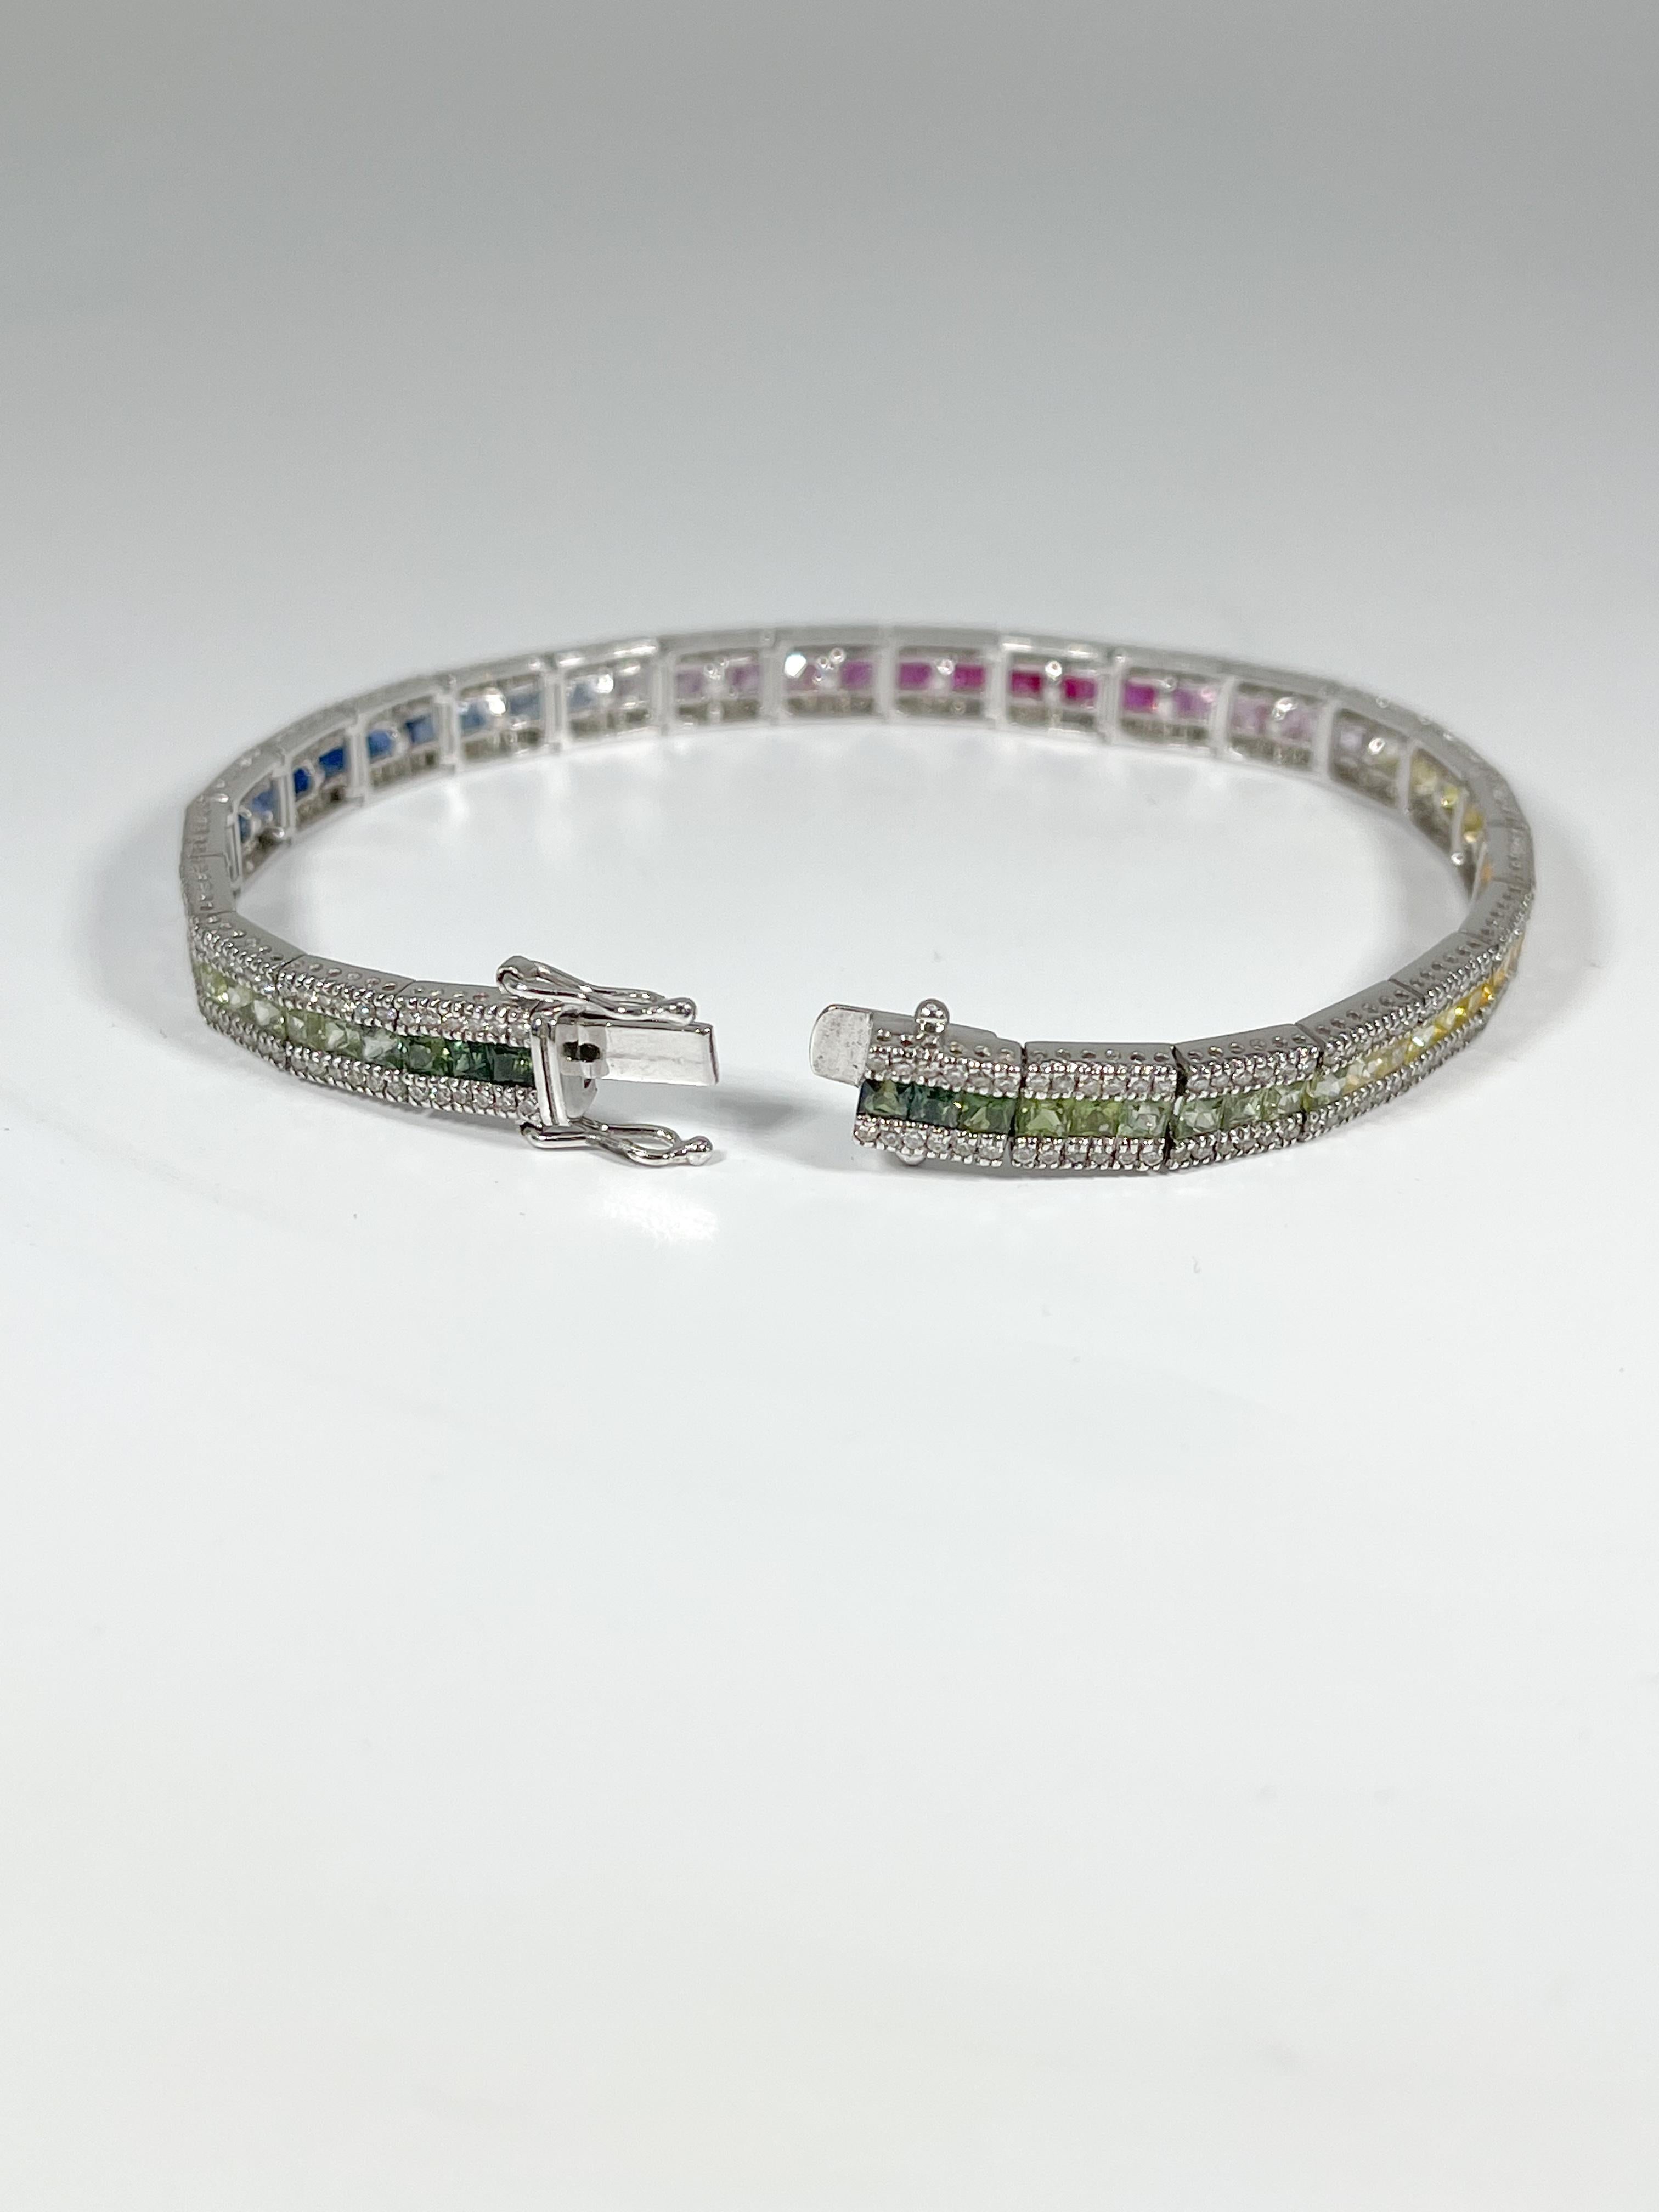 14k White Gold Colored 7.75 CTW Sapphire and 1.75 CTW Diamond Bracelet  For Sale 1